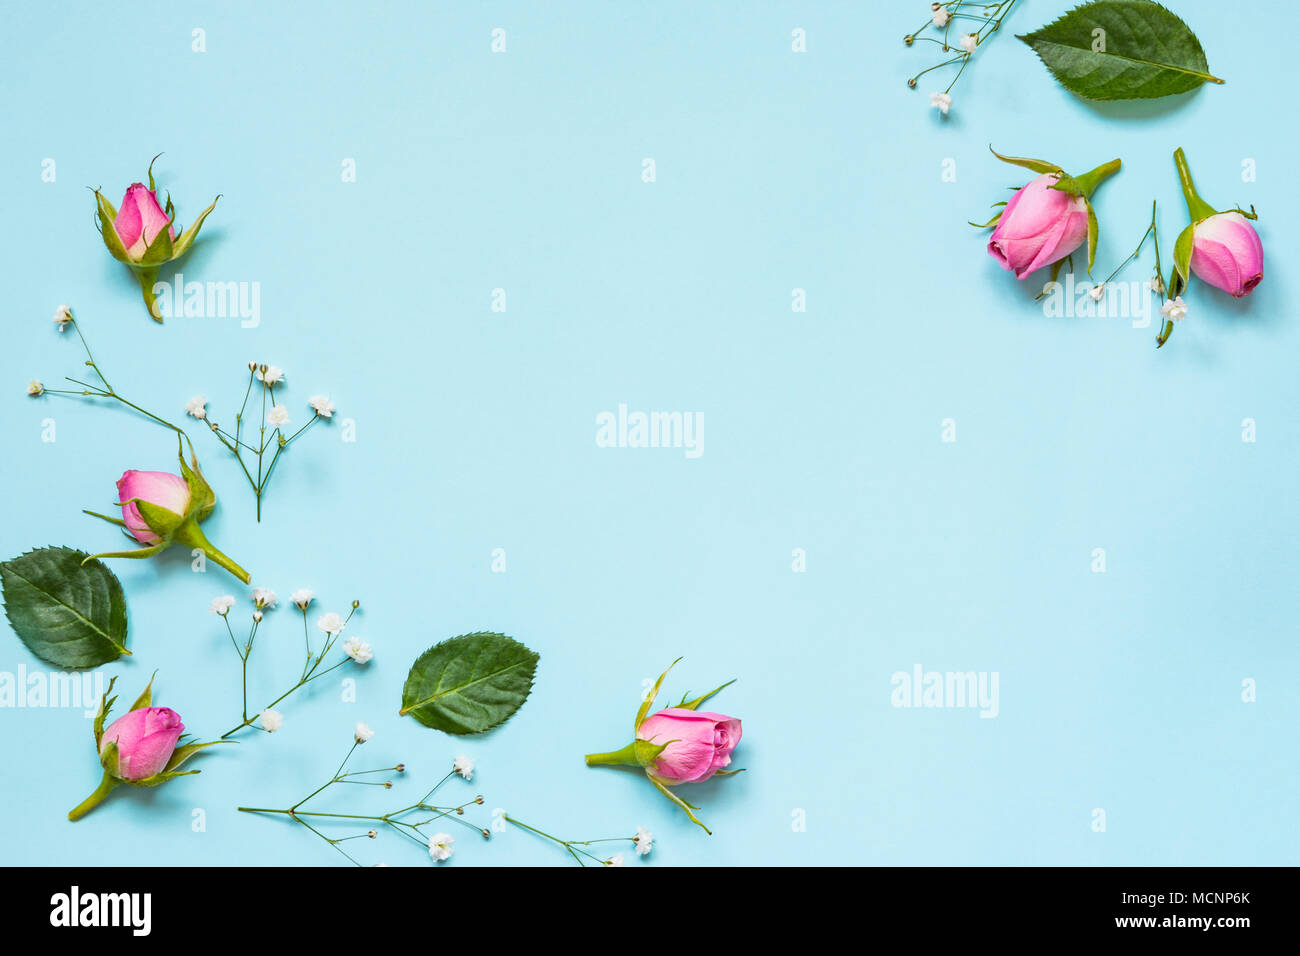 Top view of pink roses and green leaves over blue background. Abstract ...